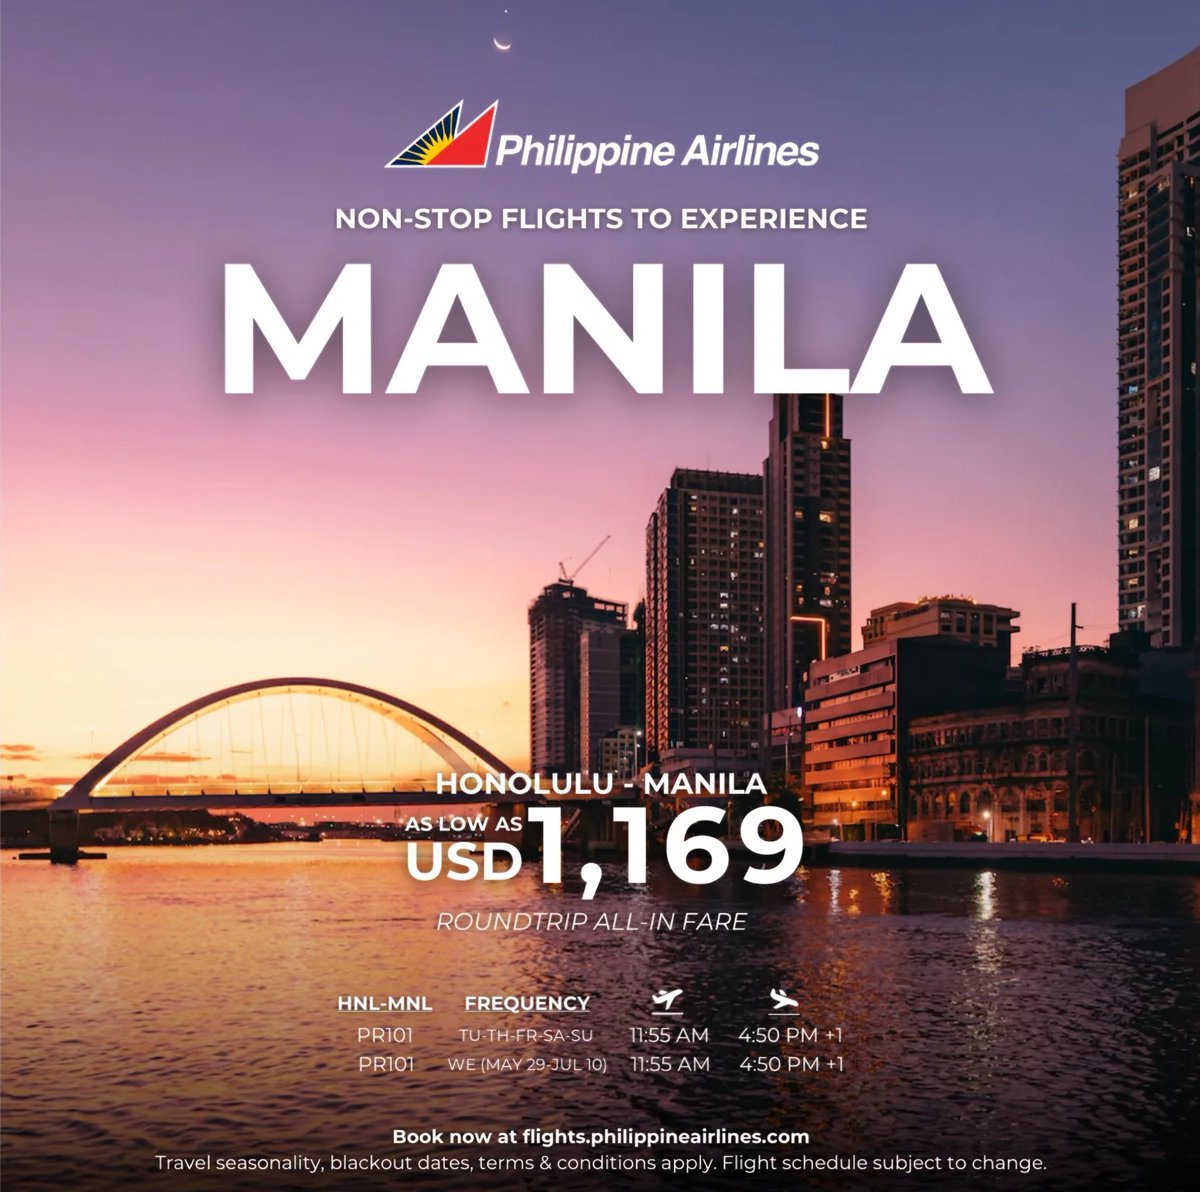 Experience Manila non-stop from Honolulu, come by JTB USA Honolulu at @AlaMoanaCenter today and save on the Philippines! 🇵🇭 🤙

👉 jtbusa.com/Honolulu

#travel #vacation #philippineairlines #flypal #visitphilippines #itsmorefuninthephilippines #LoveThePhilippines #Philippines